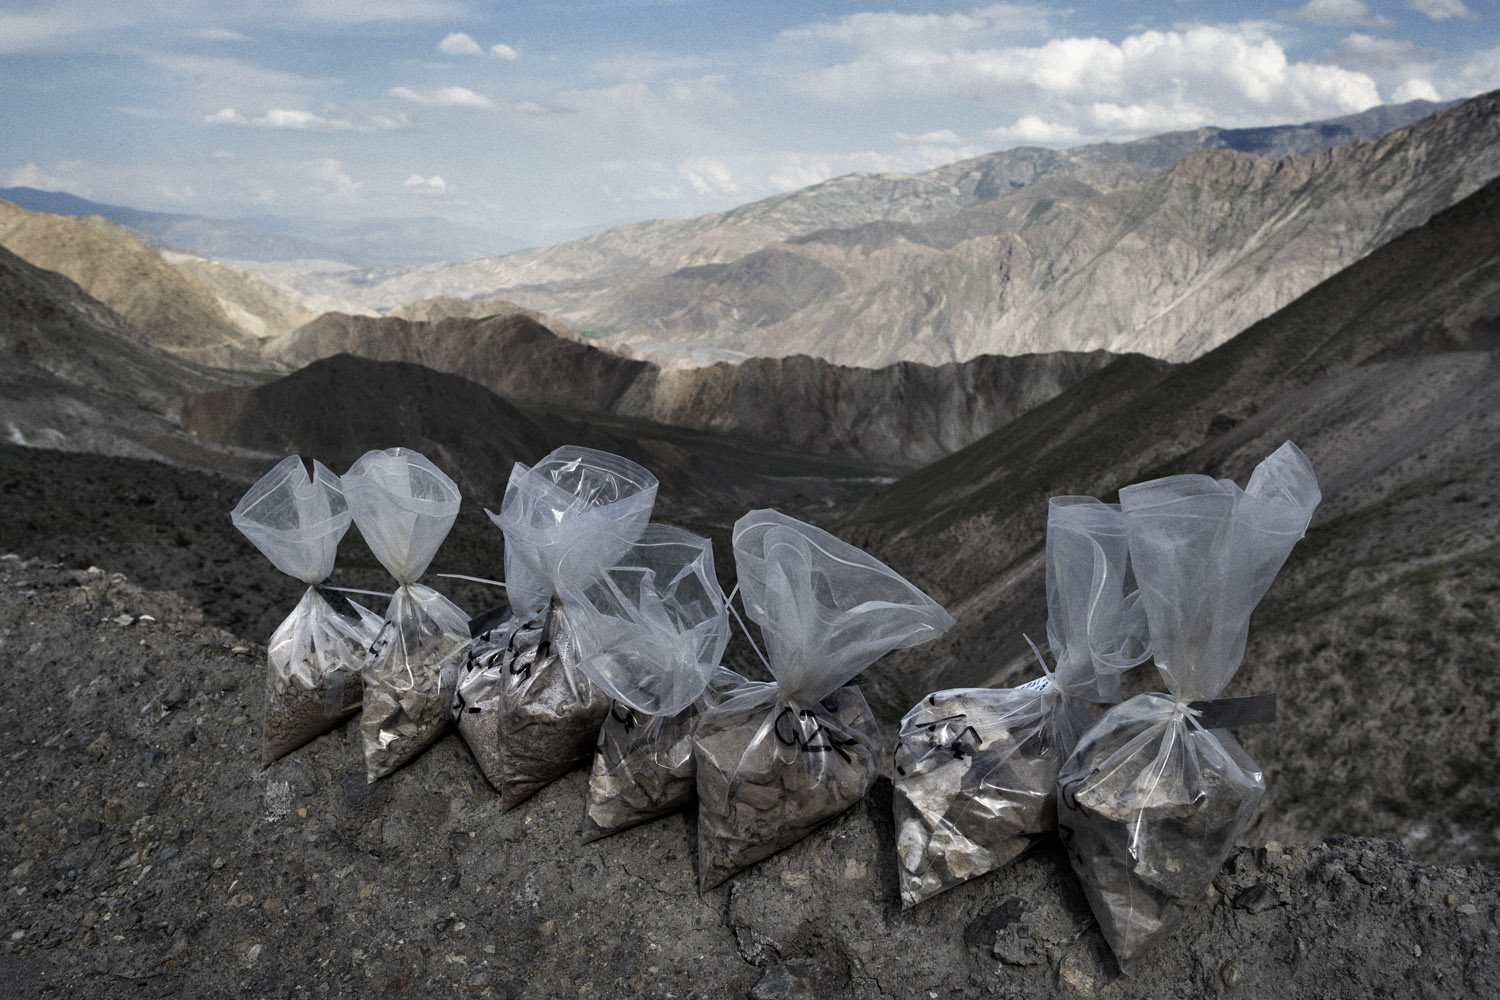 Baghlan province Afghanistan may 2013: Rock samples collected from an exploration site where Afghan Gold and Minerals is searching for gold in Baghlan province. The samples will be ground down and sent back to a laboratory in Kabul for analysis.